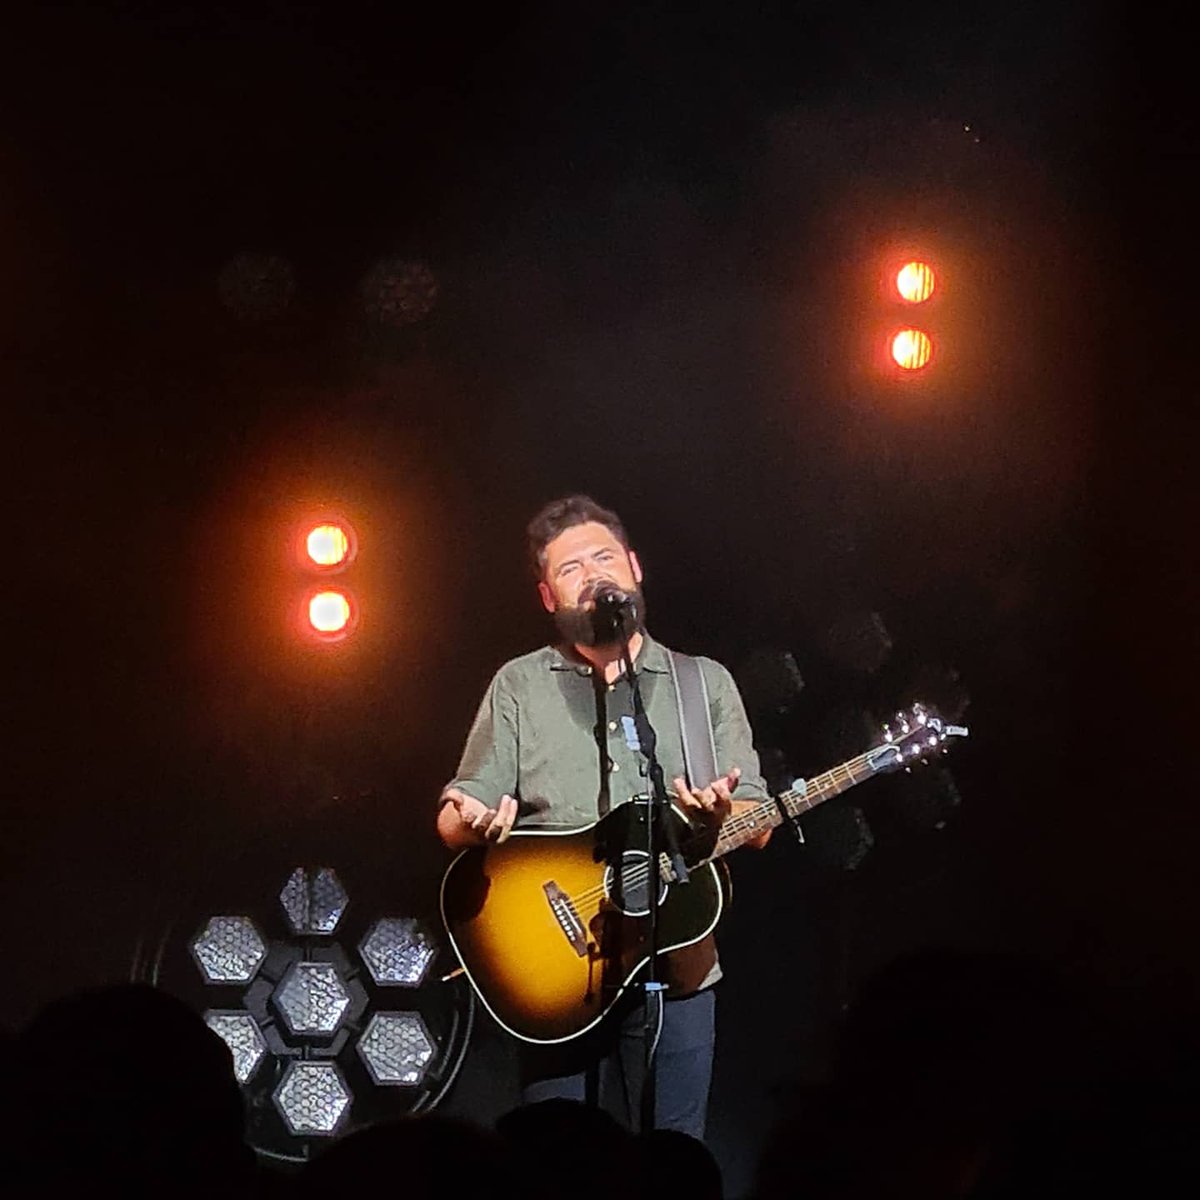 First gig in what felt like forever! @passengermusic at @TheBarrowlands was worth the wait! #passengermusic #lifesfortheliving